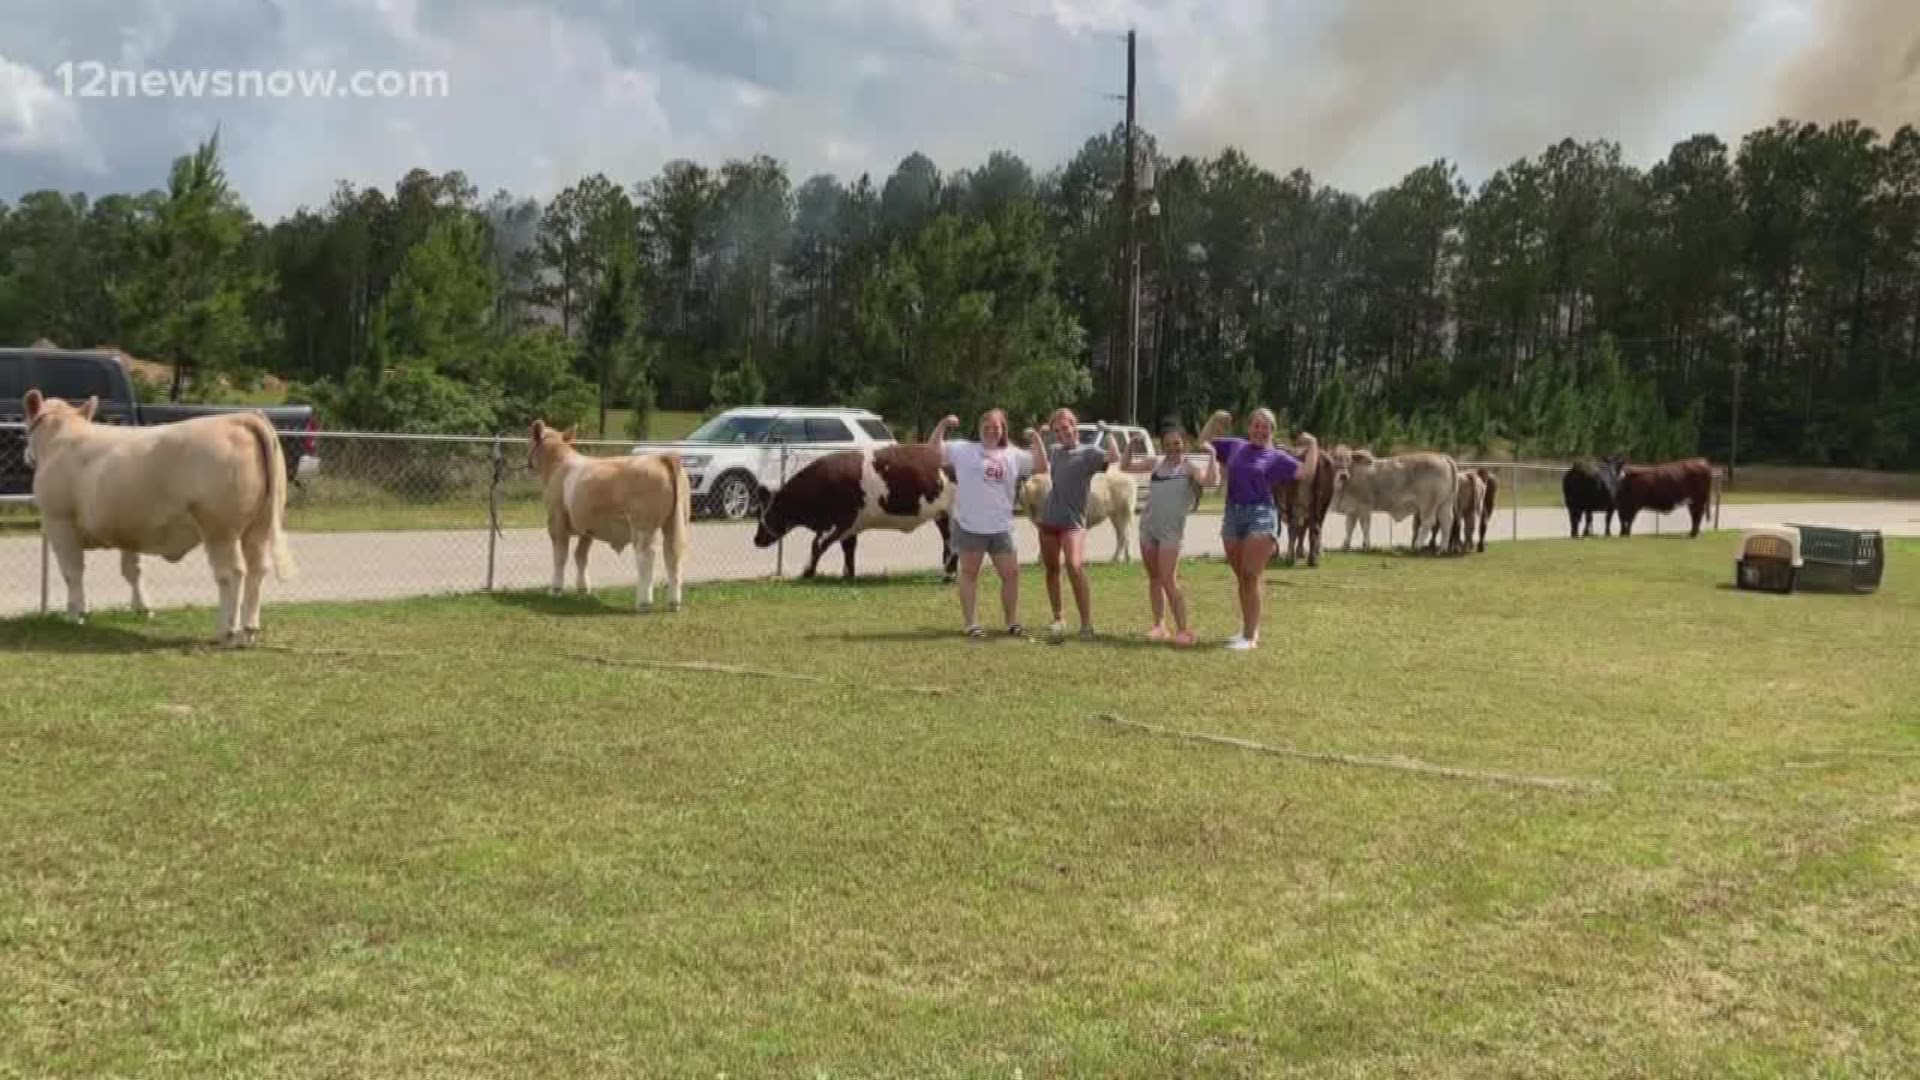 Some students in Lumberton worked Tuesday afternoon to move animals away from the brush fire